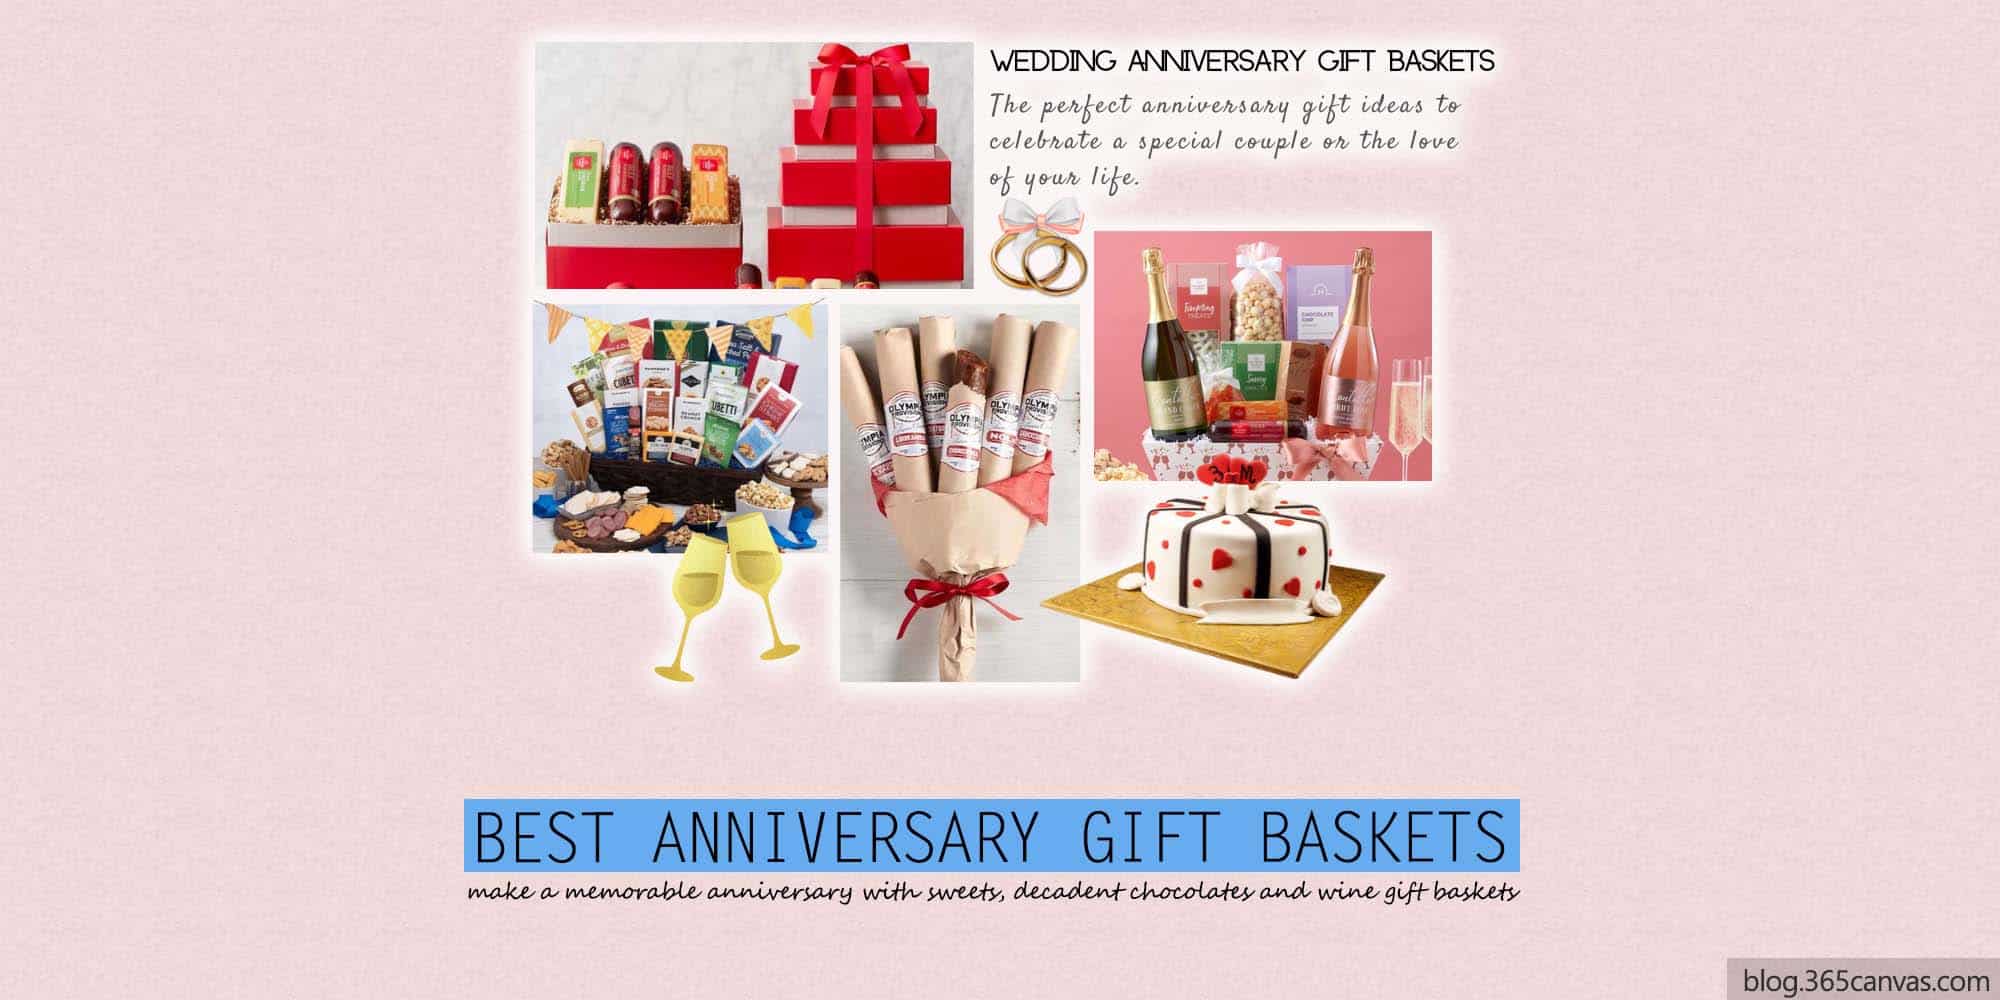 The 25 Best Anniversary Gift Baskets For Him, Her & Couple (2023)